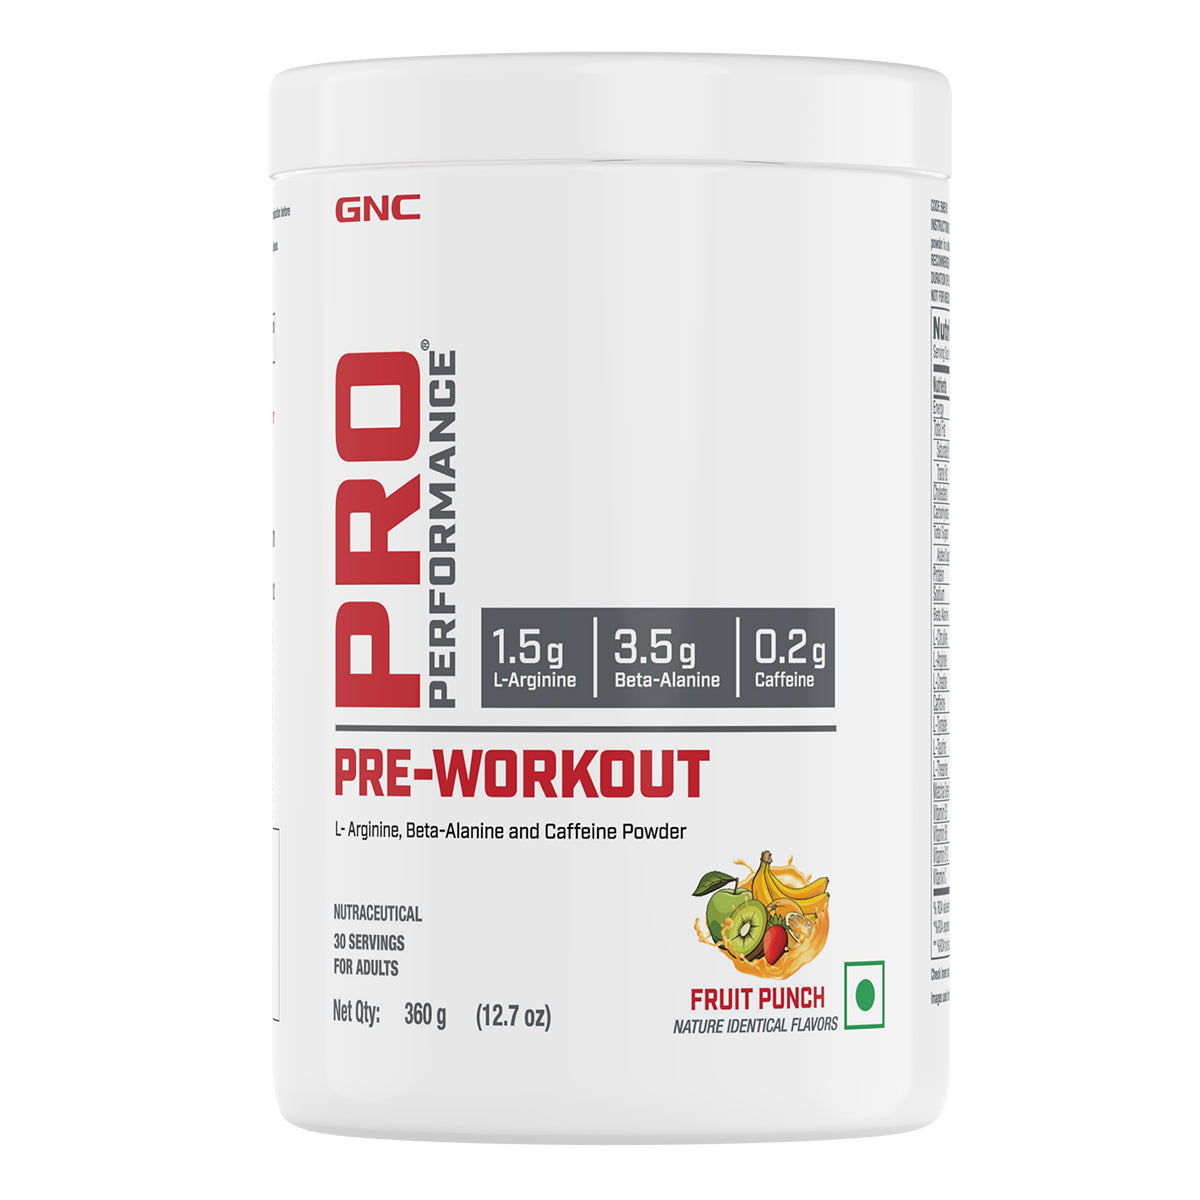 Pre & Post Workout Duo - For Complete Workout | Improves Energy & Focus |Faster Recovery & Lean Muscle Gains